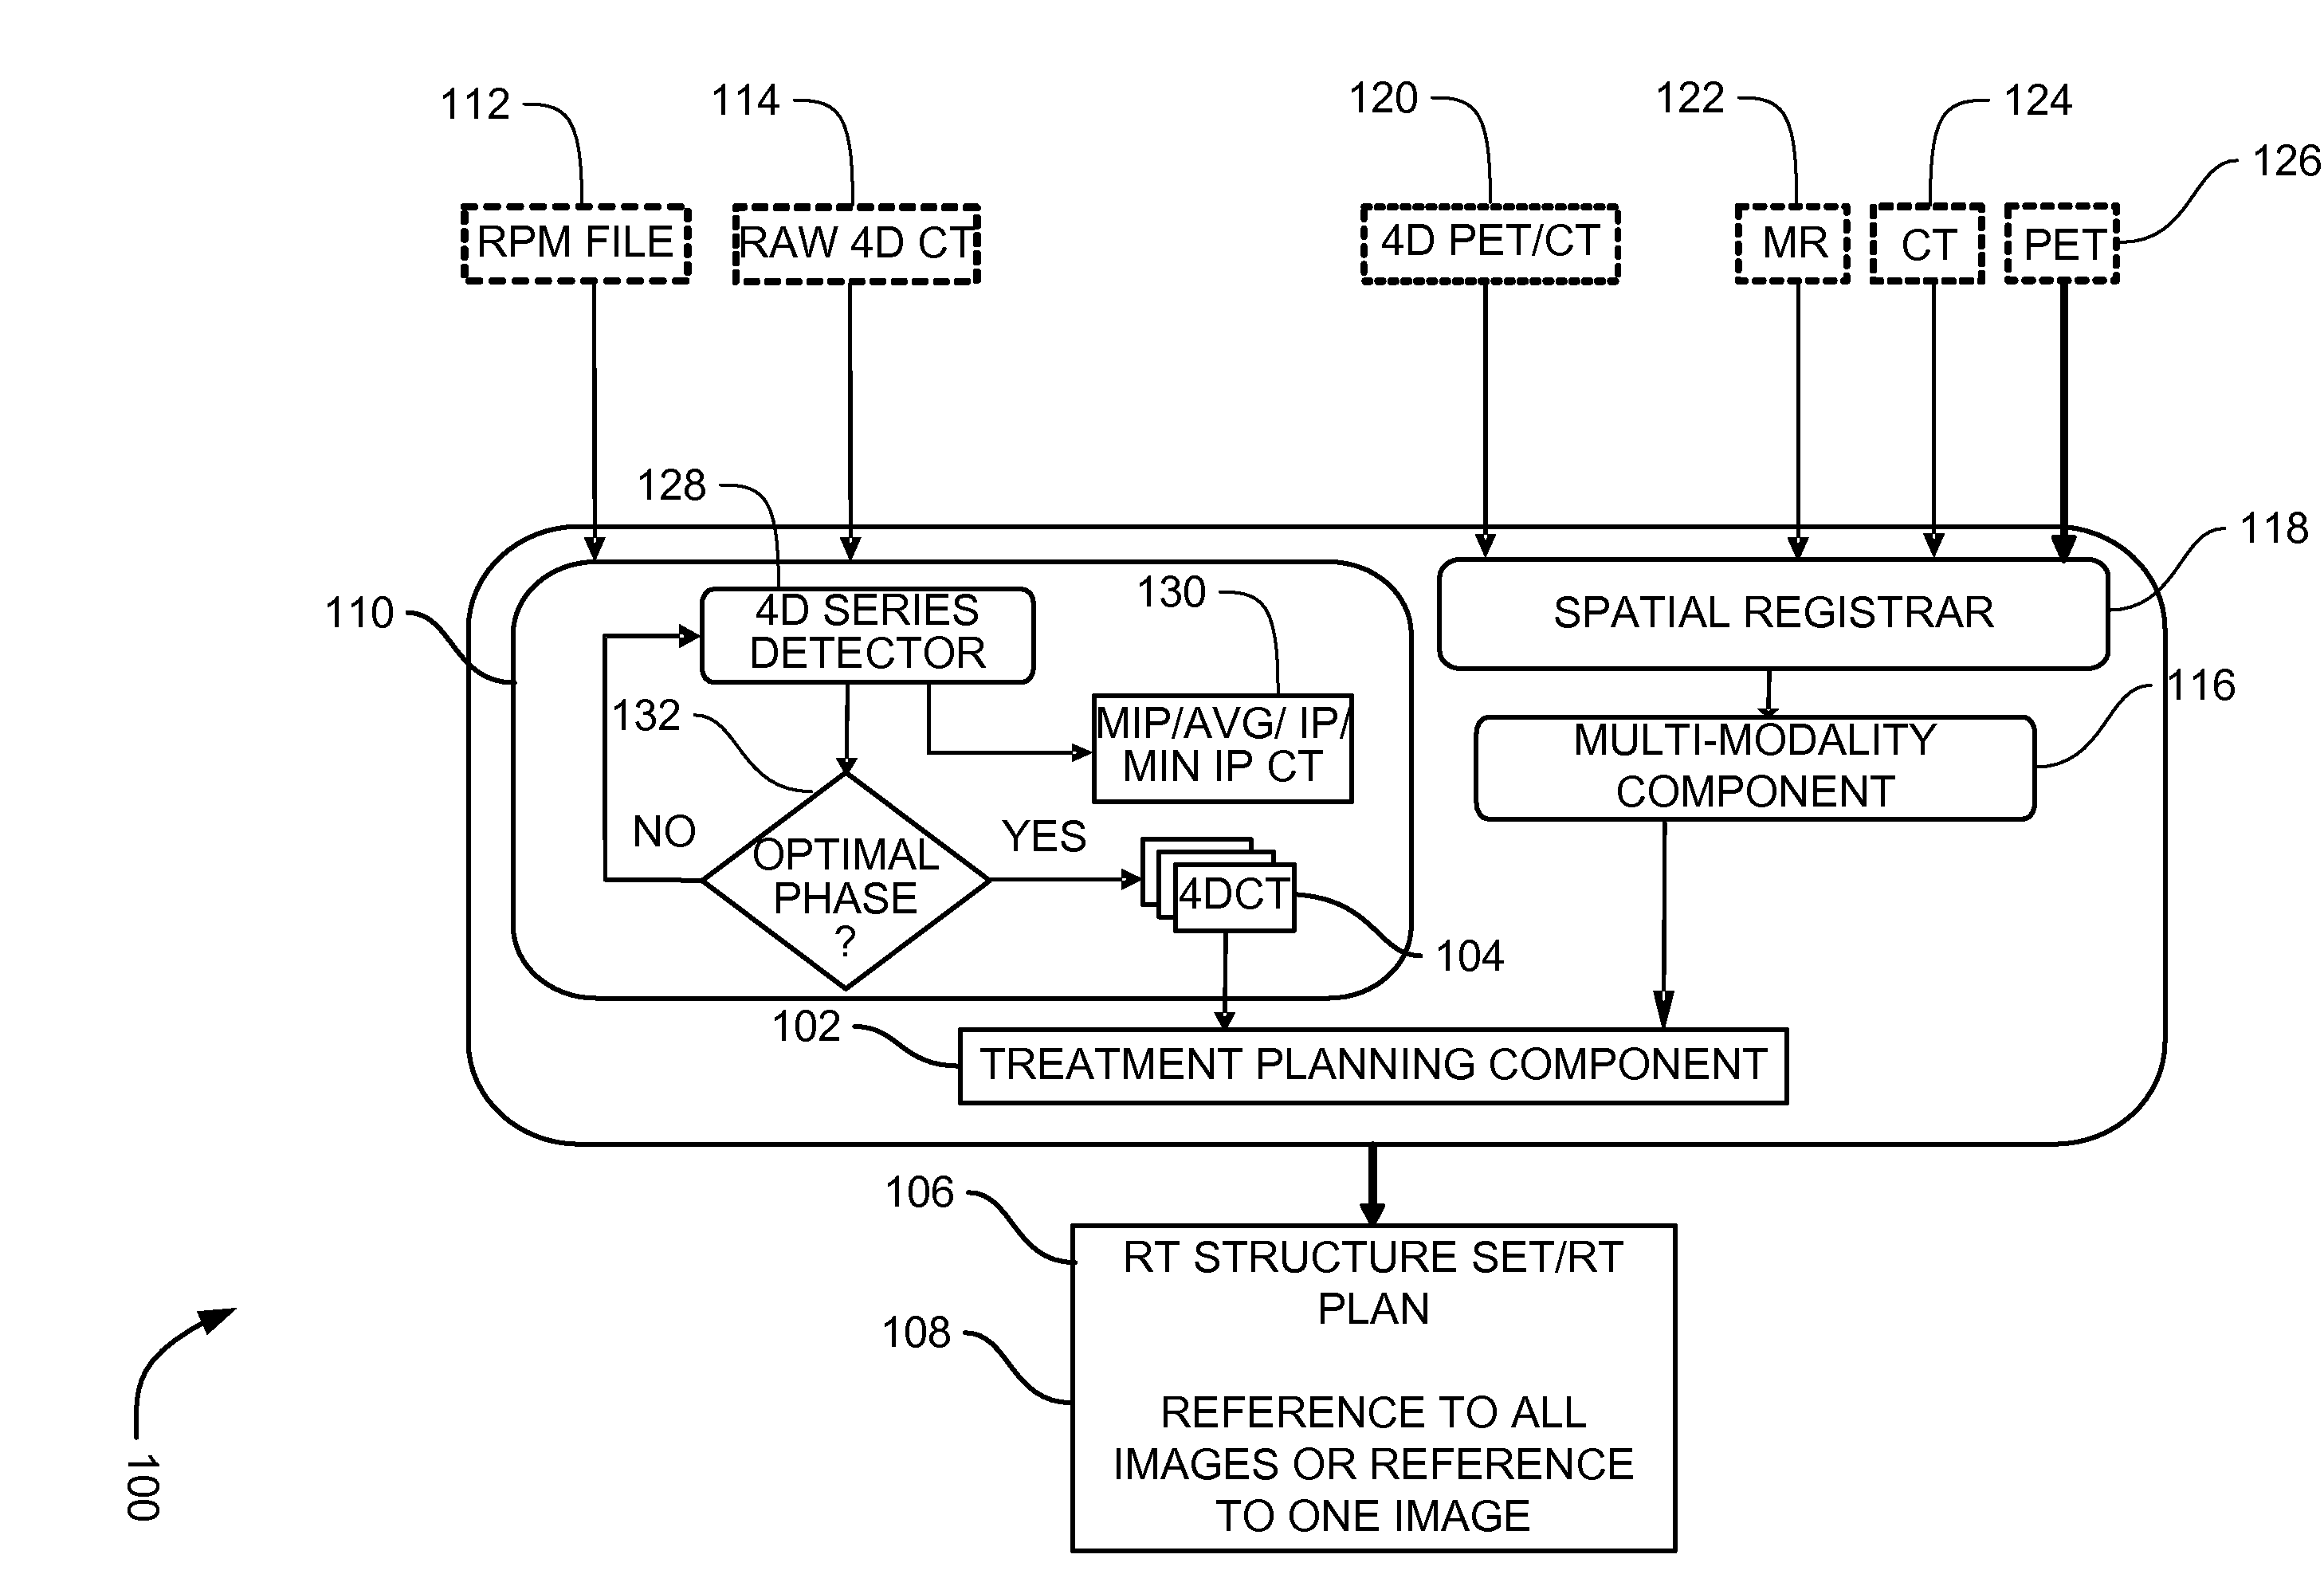 Systems, methods and apparatus for oncology workflow integration